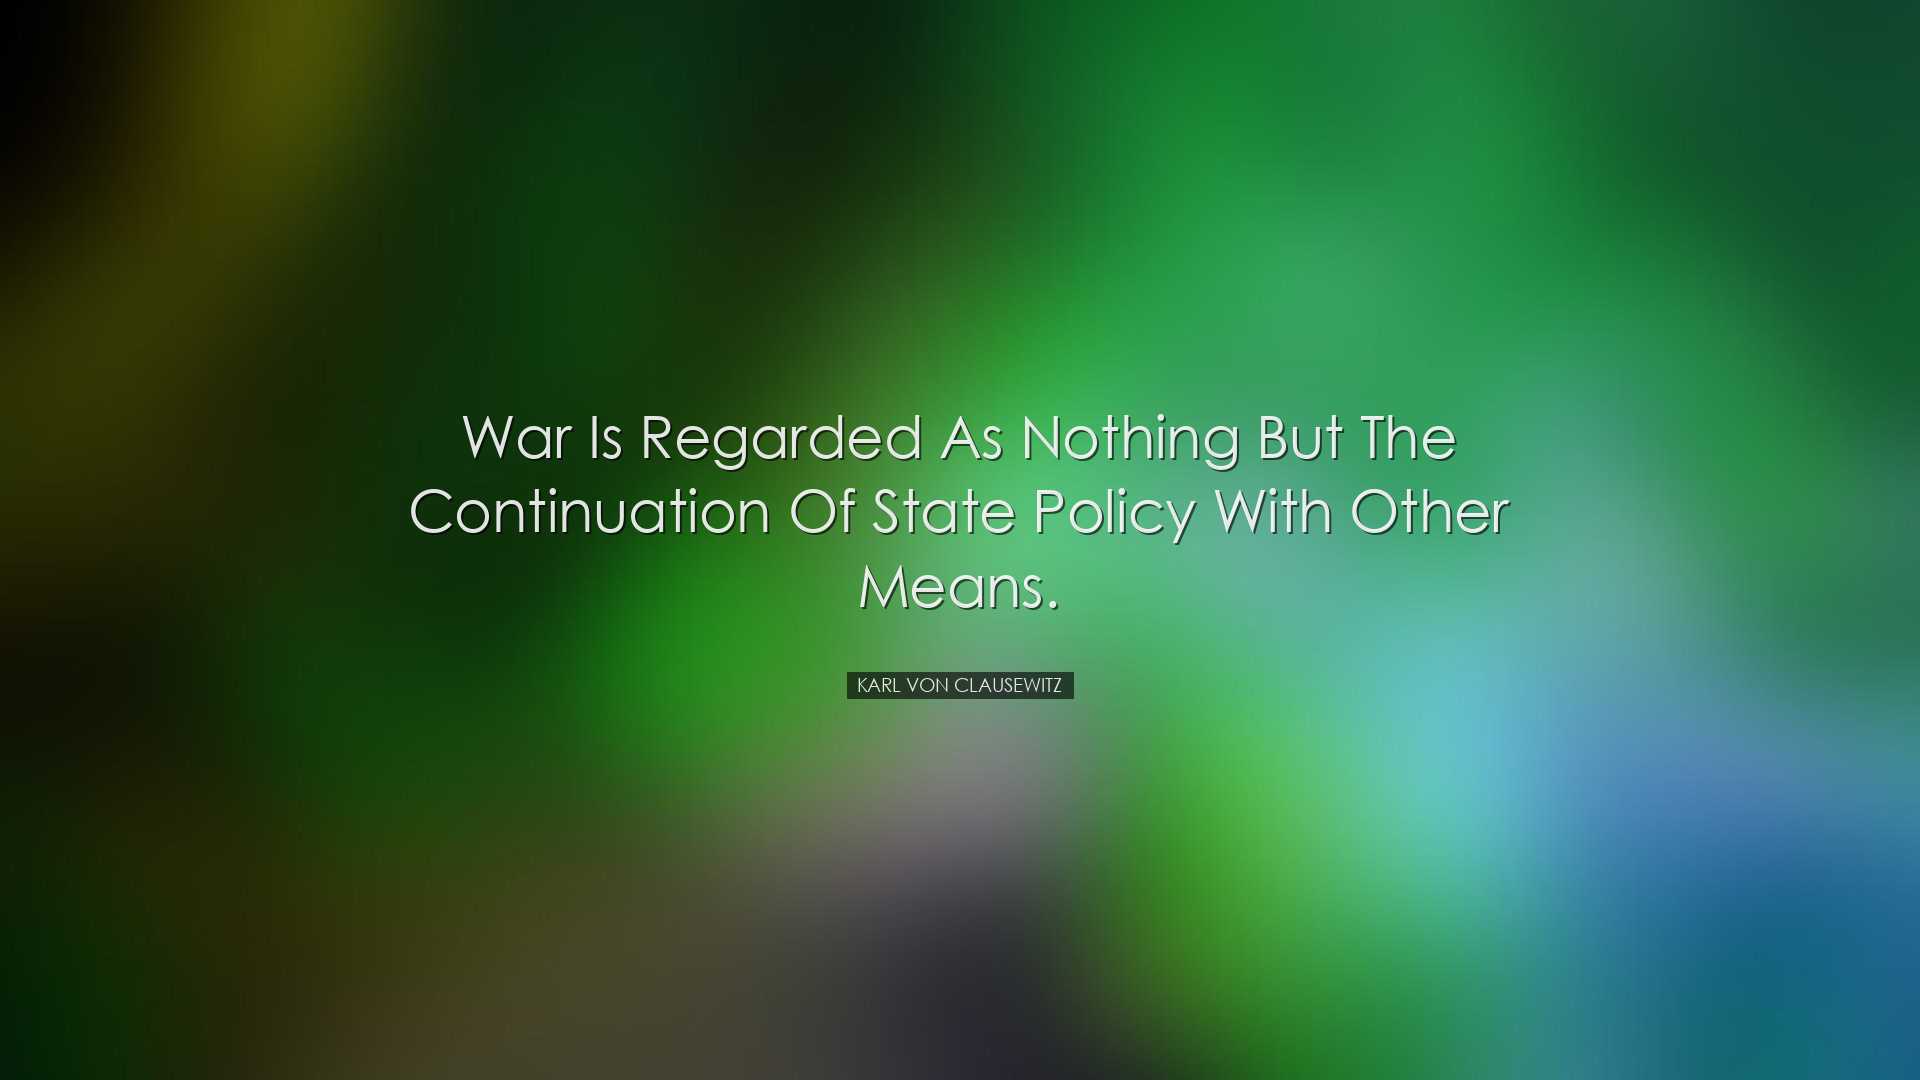 War is regarded as nothing but the continuation of state policy wi